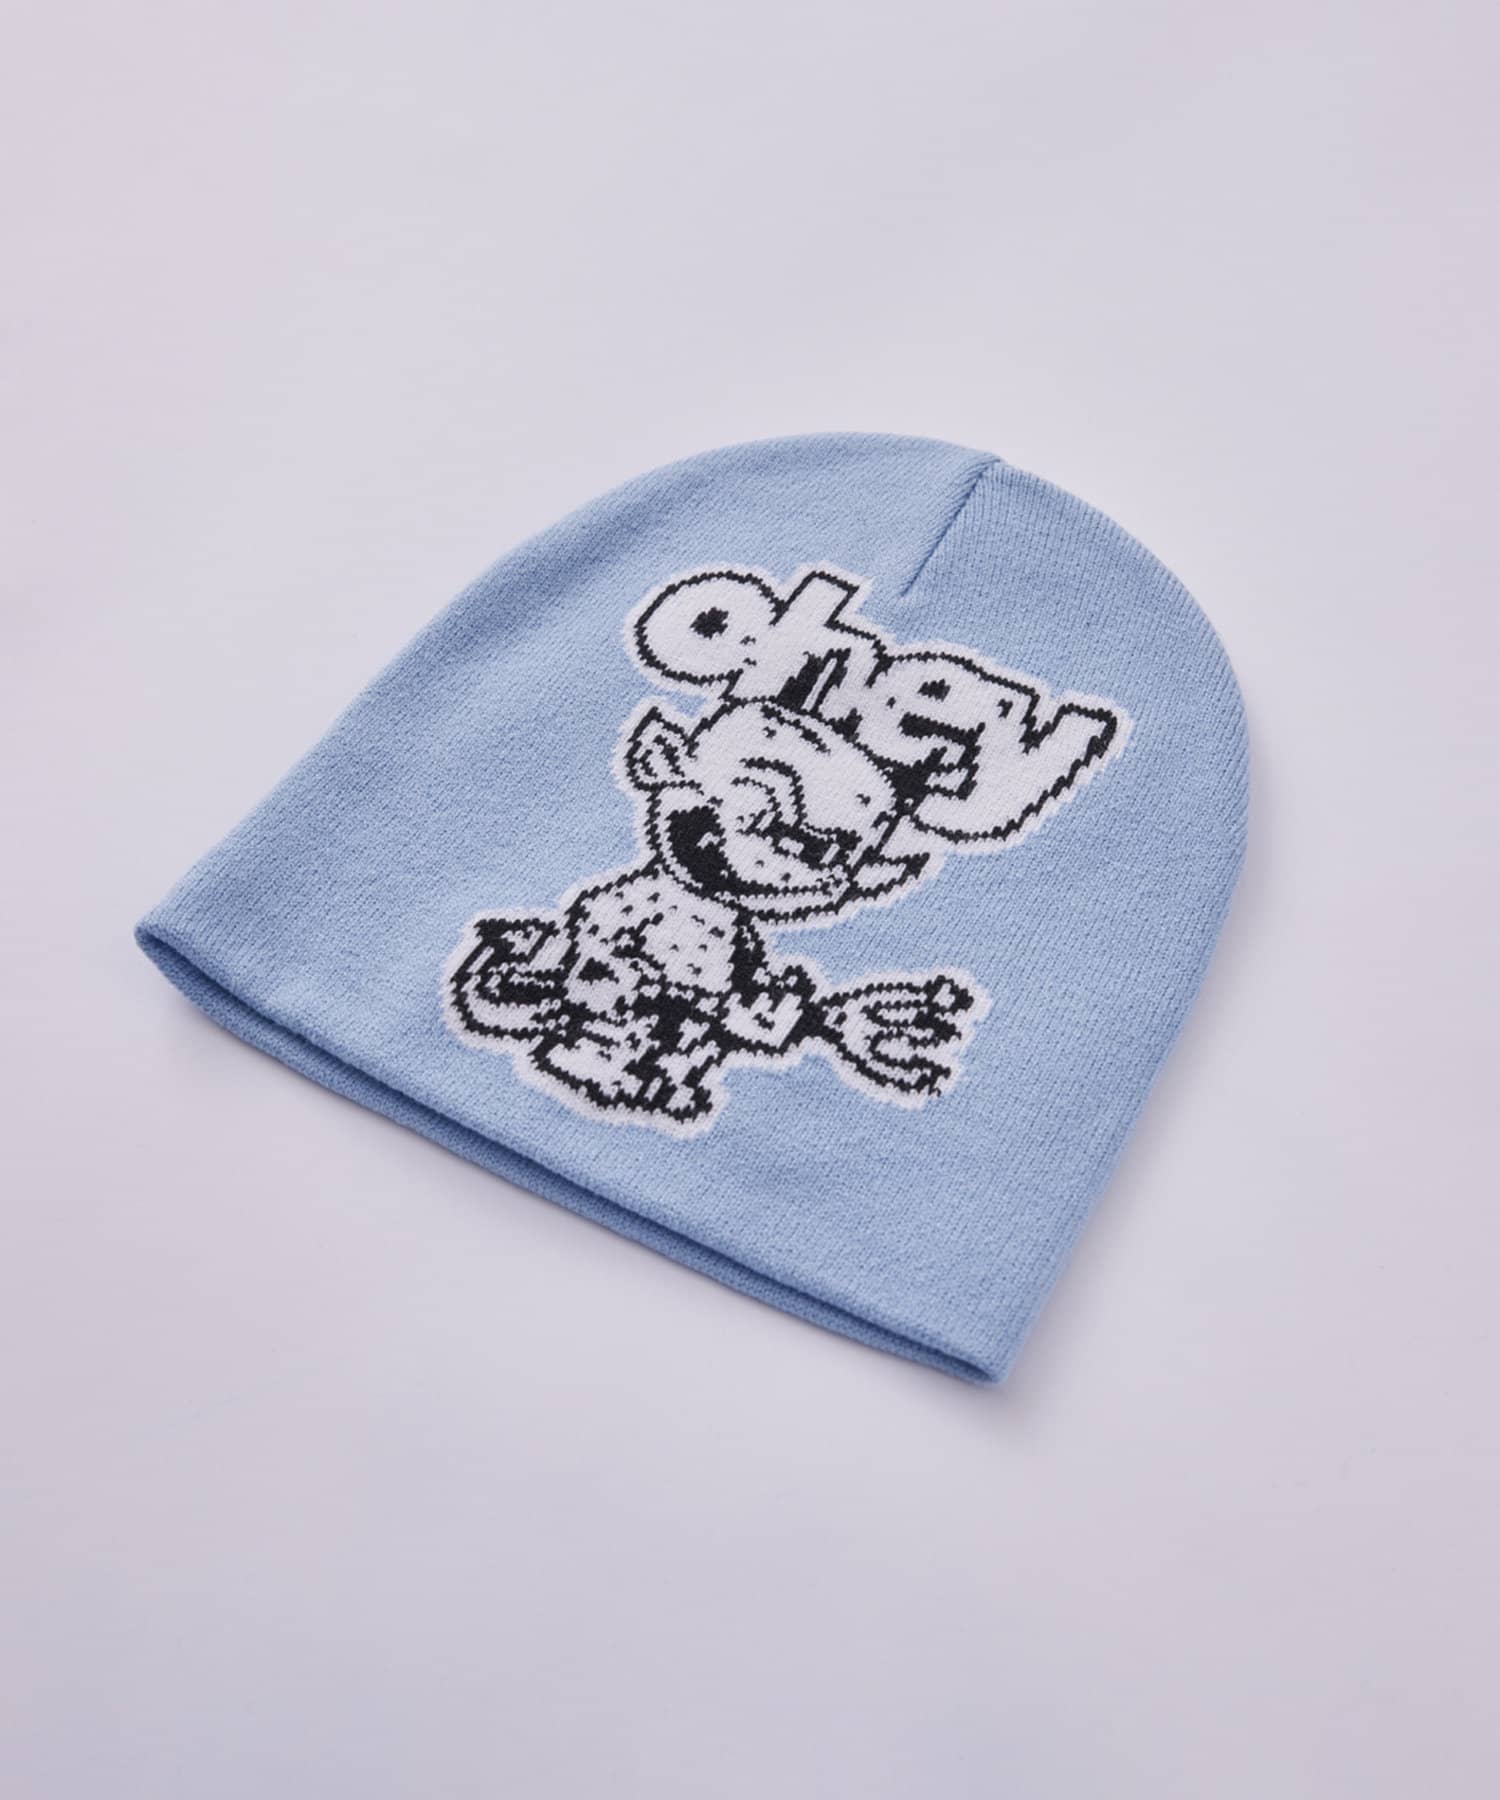 WHO’S WHO gallery(フーズフーギャラリー) OBEY DEVIL BEANIE